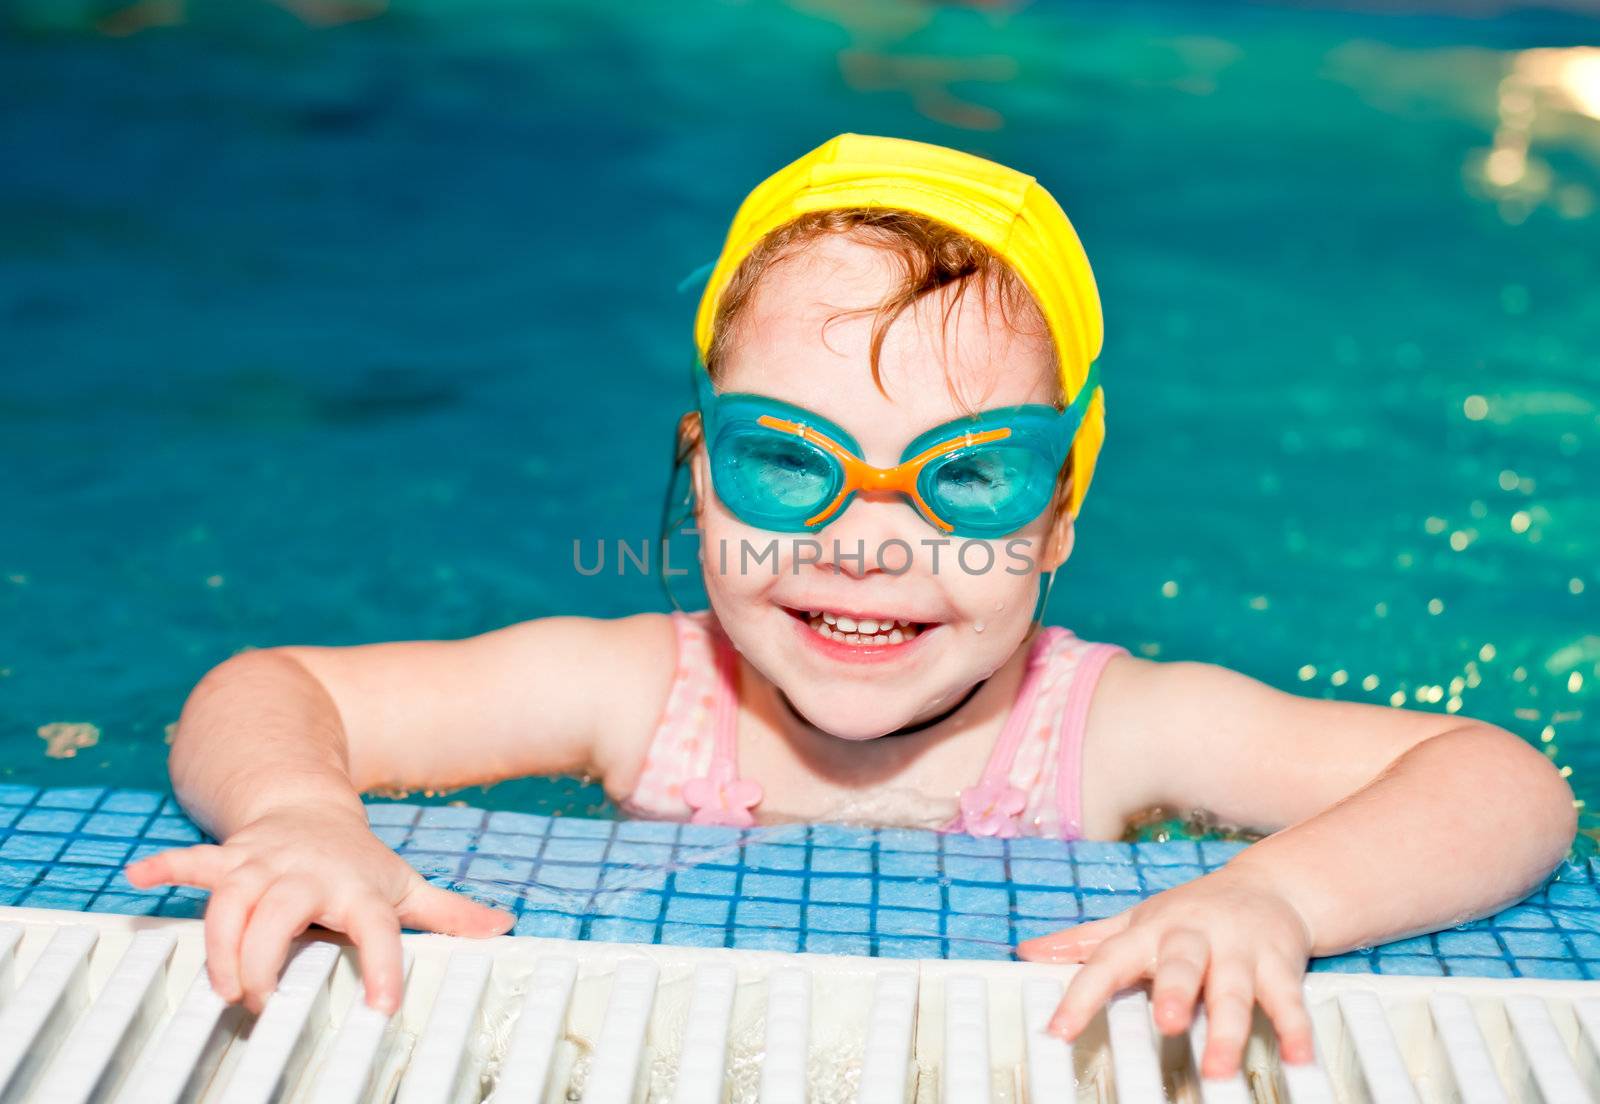 Child in a swimming pool by naumoid